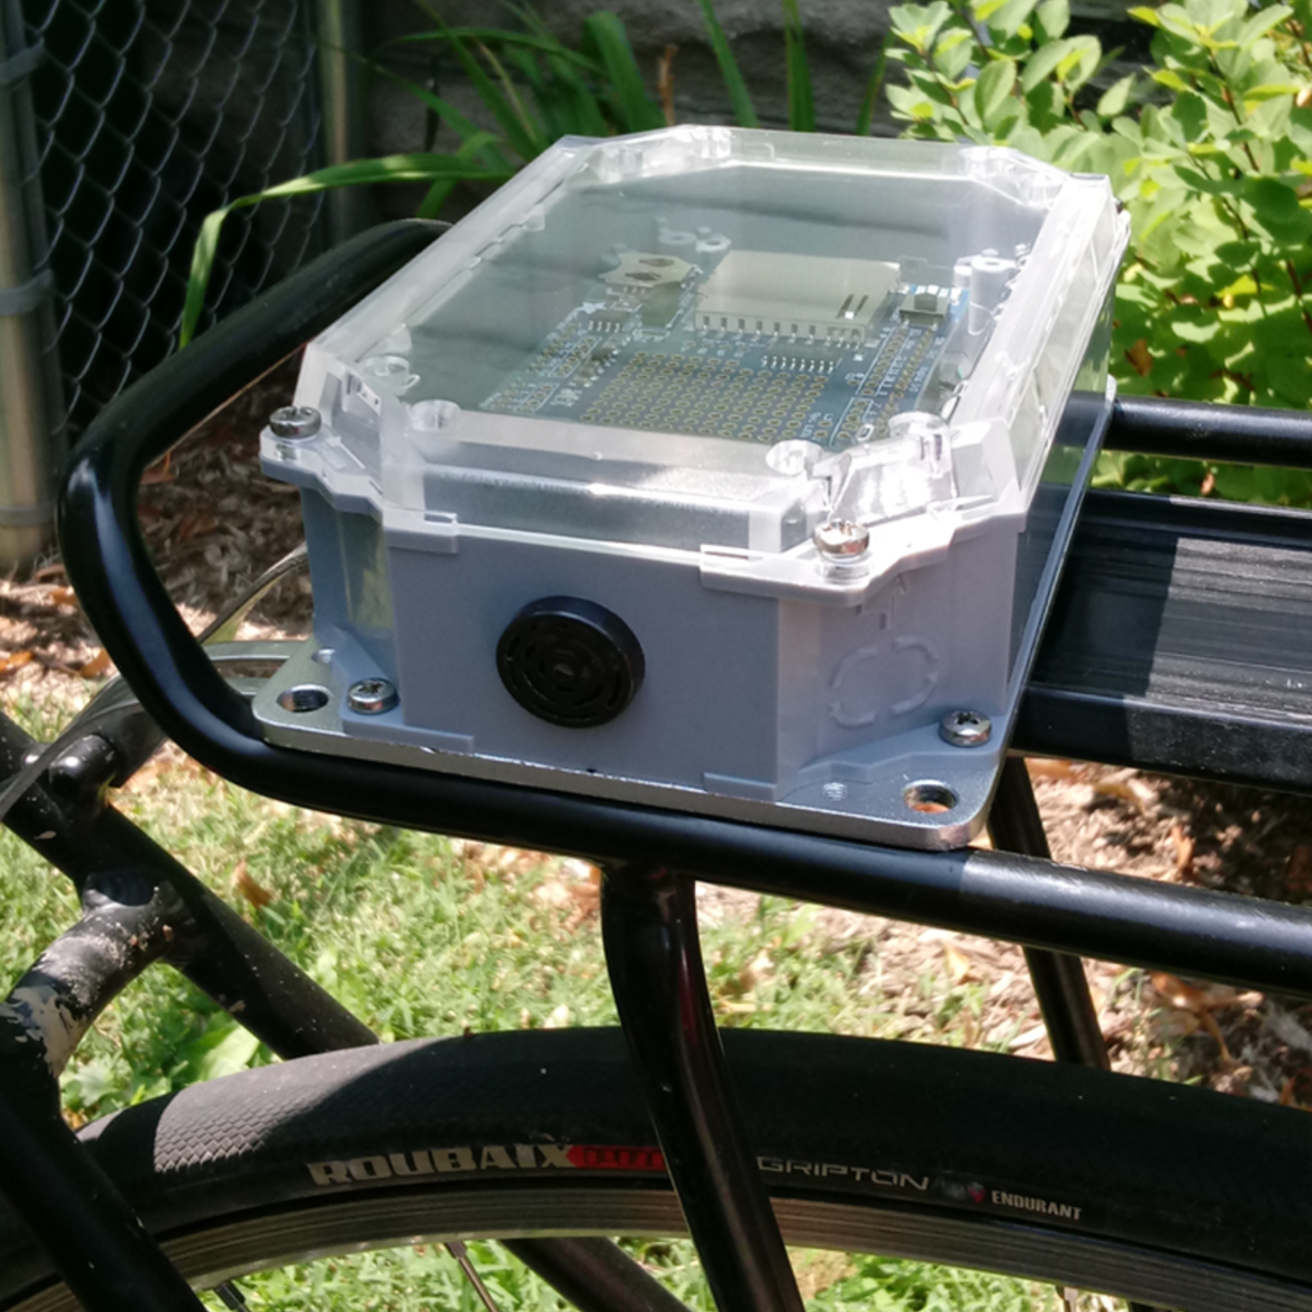 A distance sensing device mounted to a bicycle rack